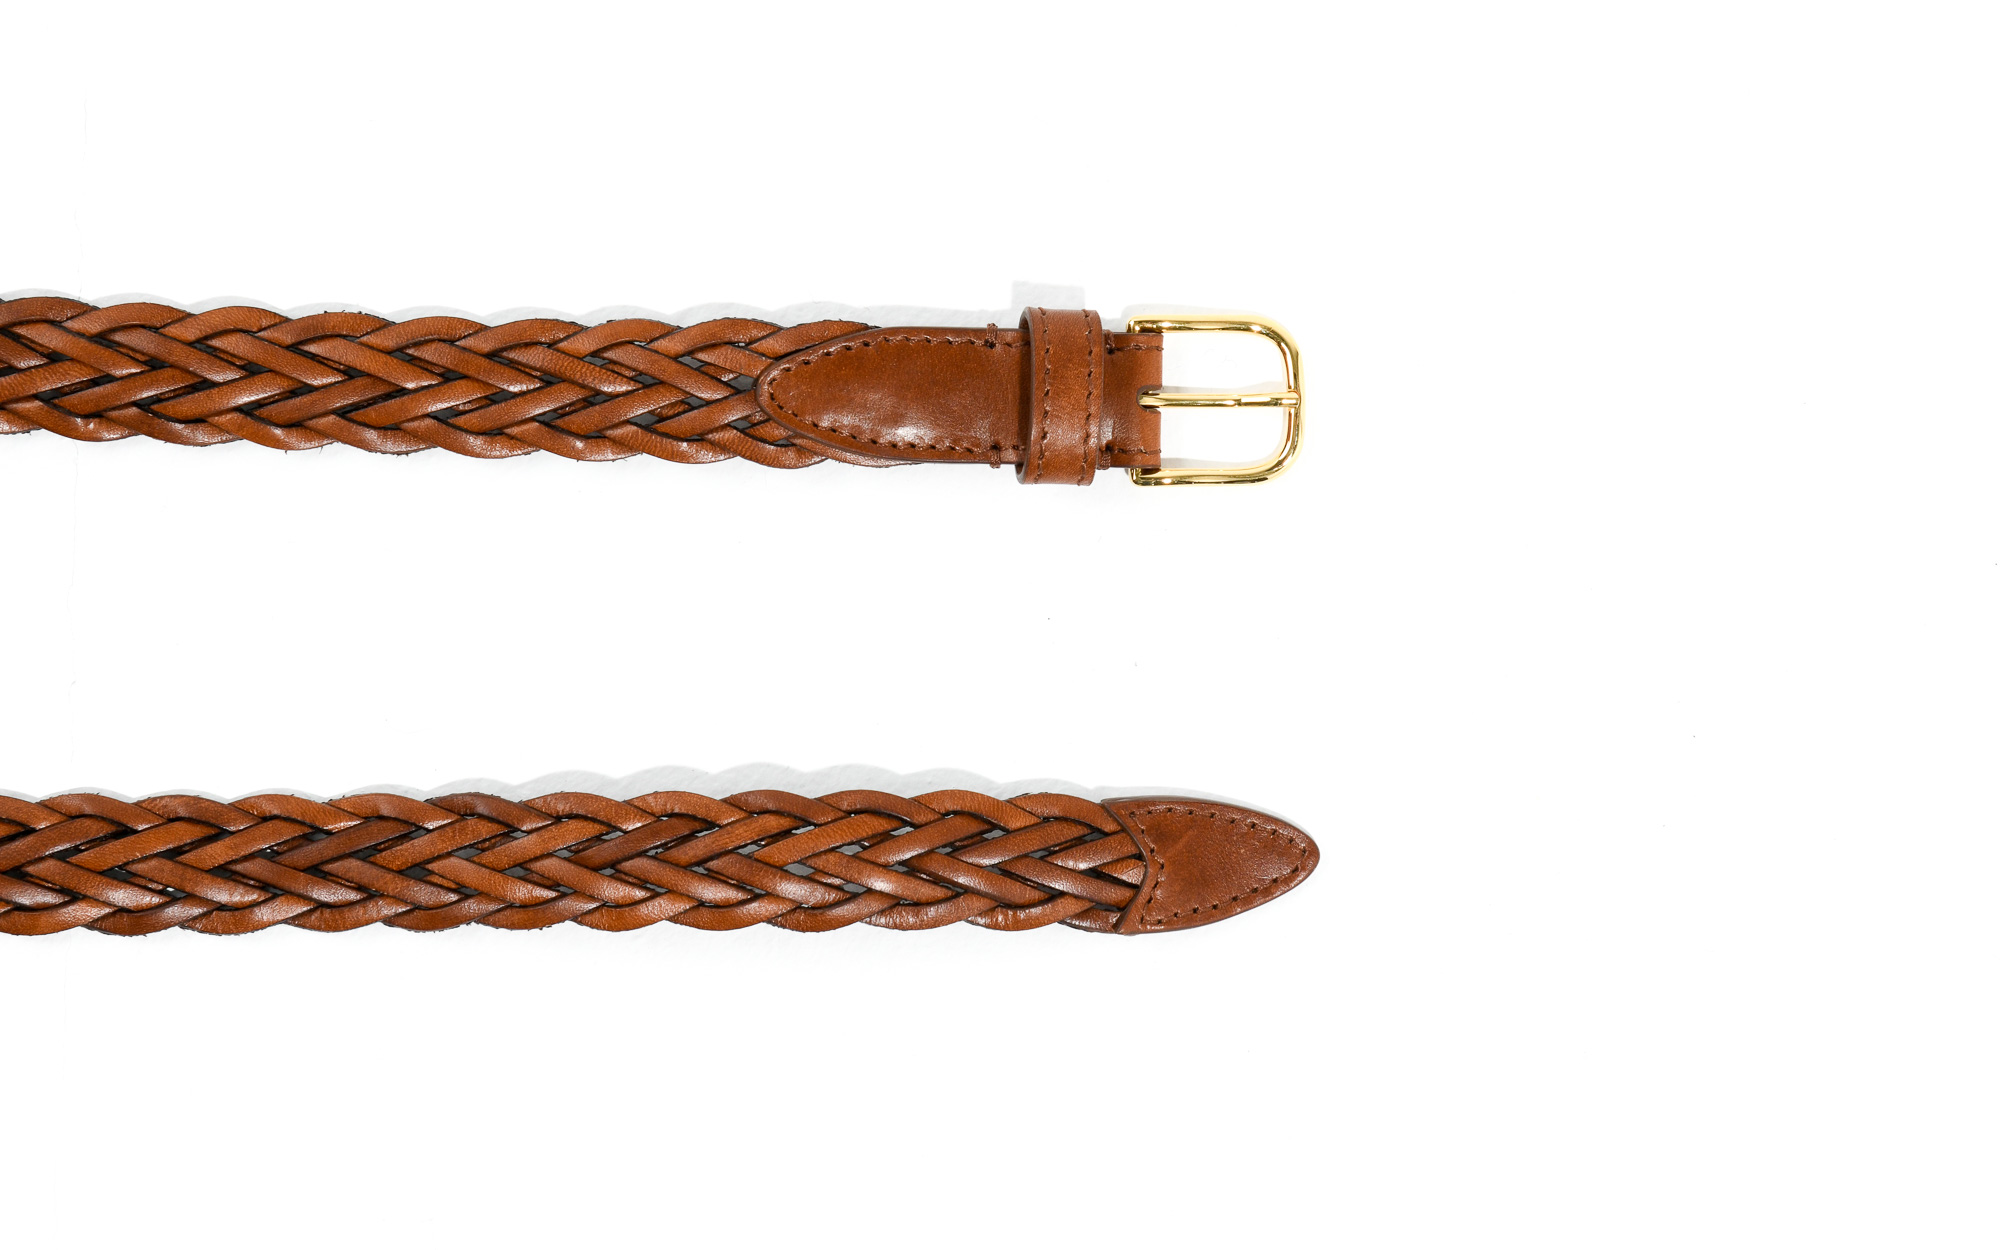 THIN BELT IN BRAIDED LEATHER - COGNAC BROWN | HUSBANDS